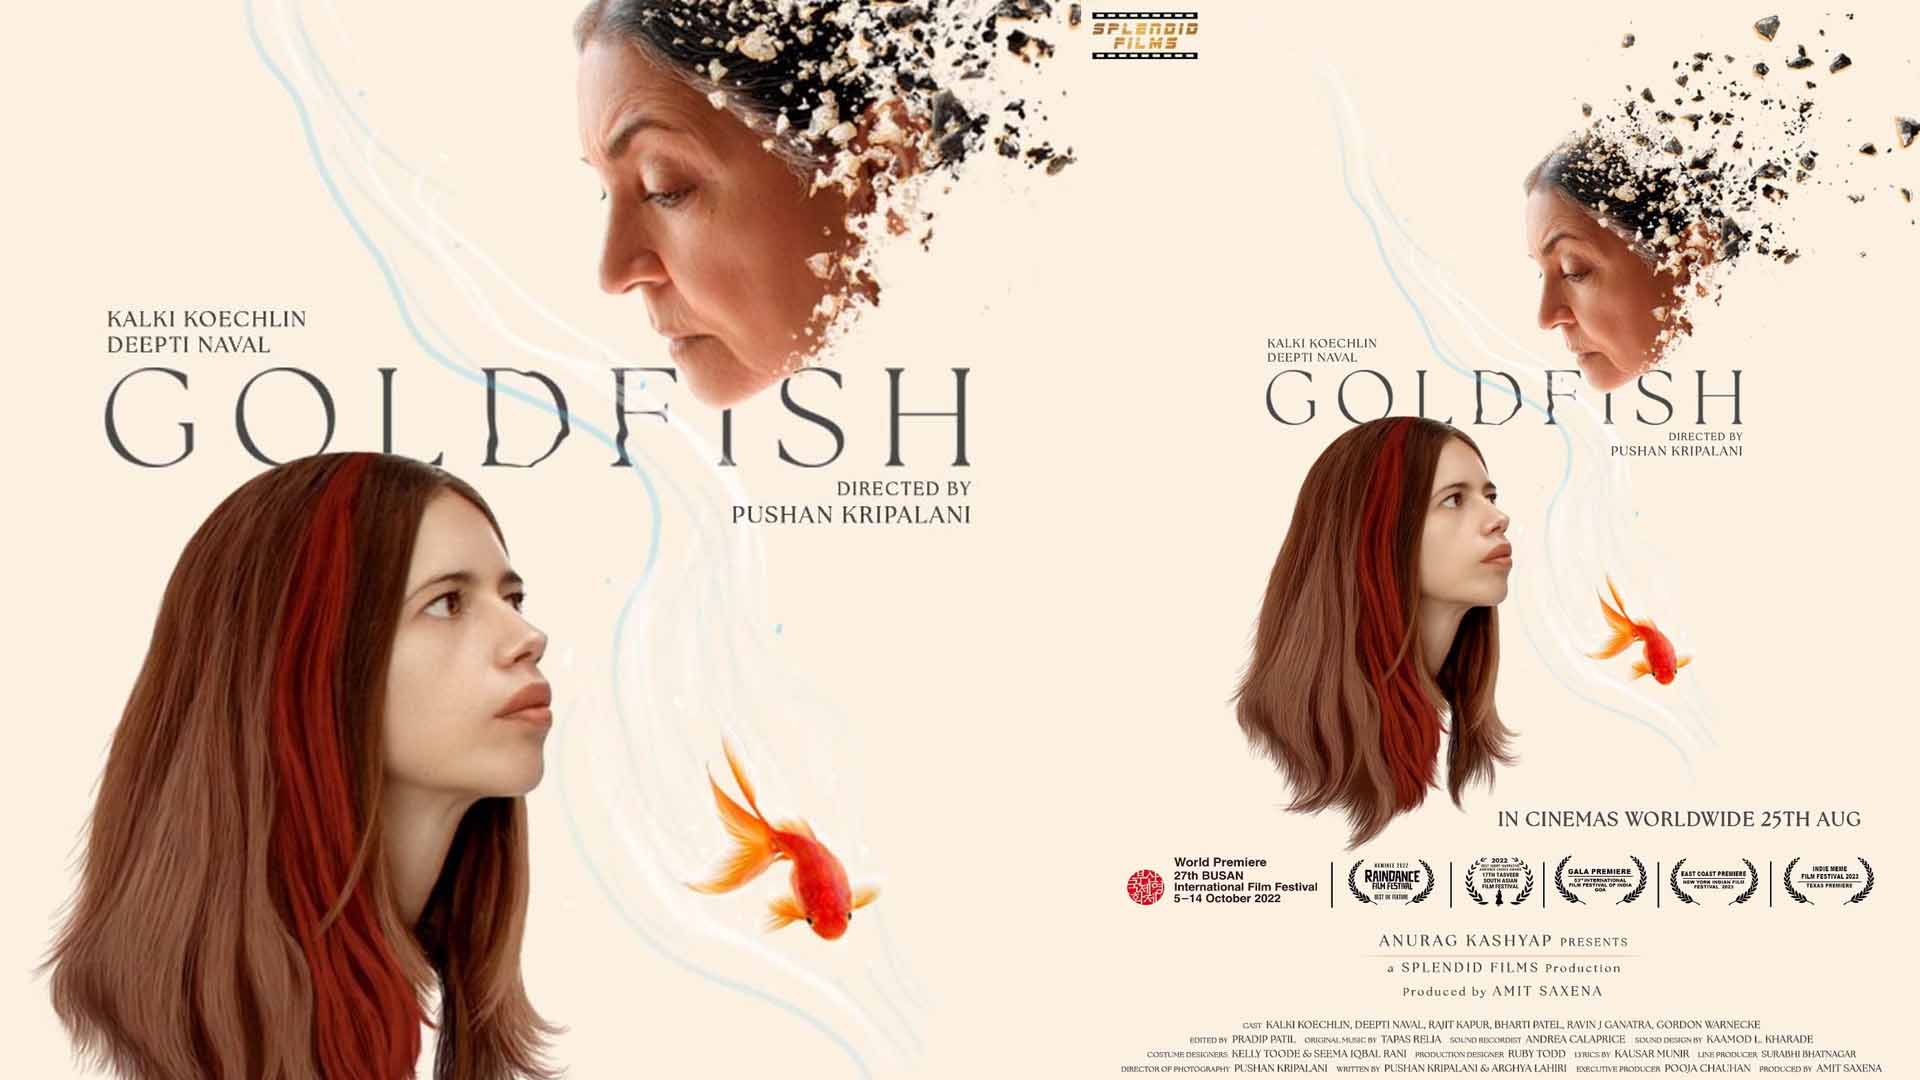 Goldfish presented by Anurag Kashyap, featuring Kalki Koechlin, Deepti Naval and Rajit Kapur, in theatres on 25th August 2023